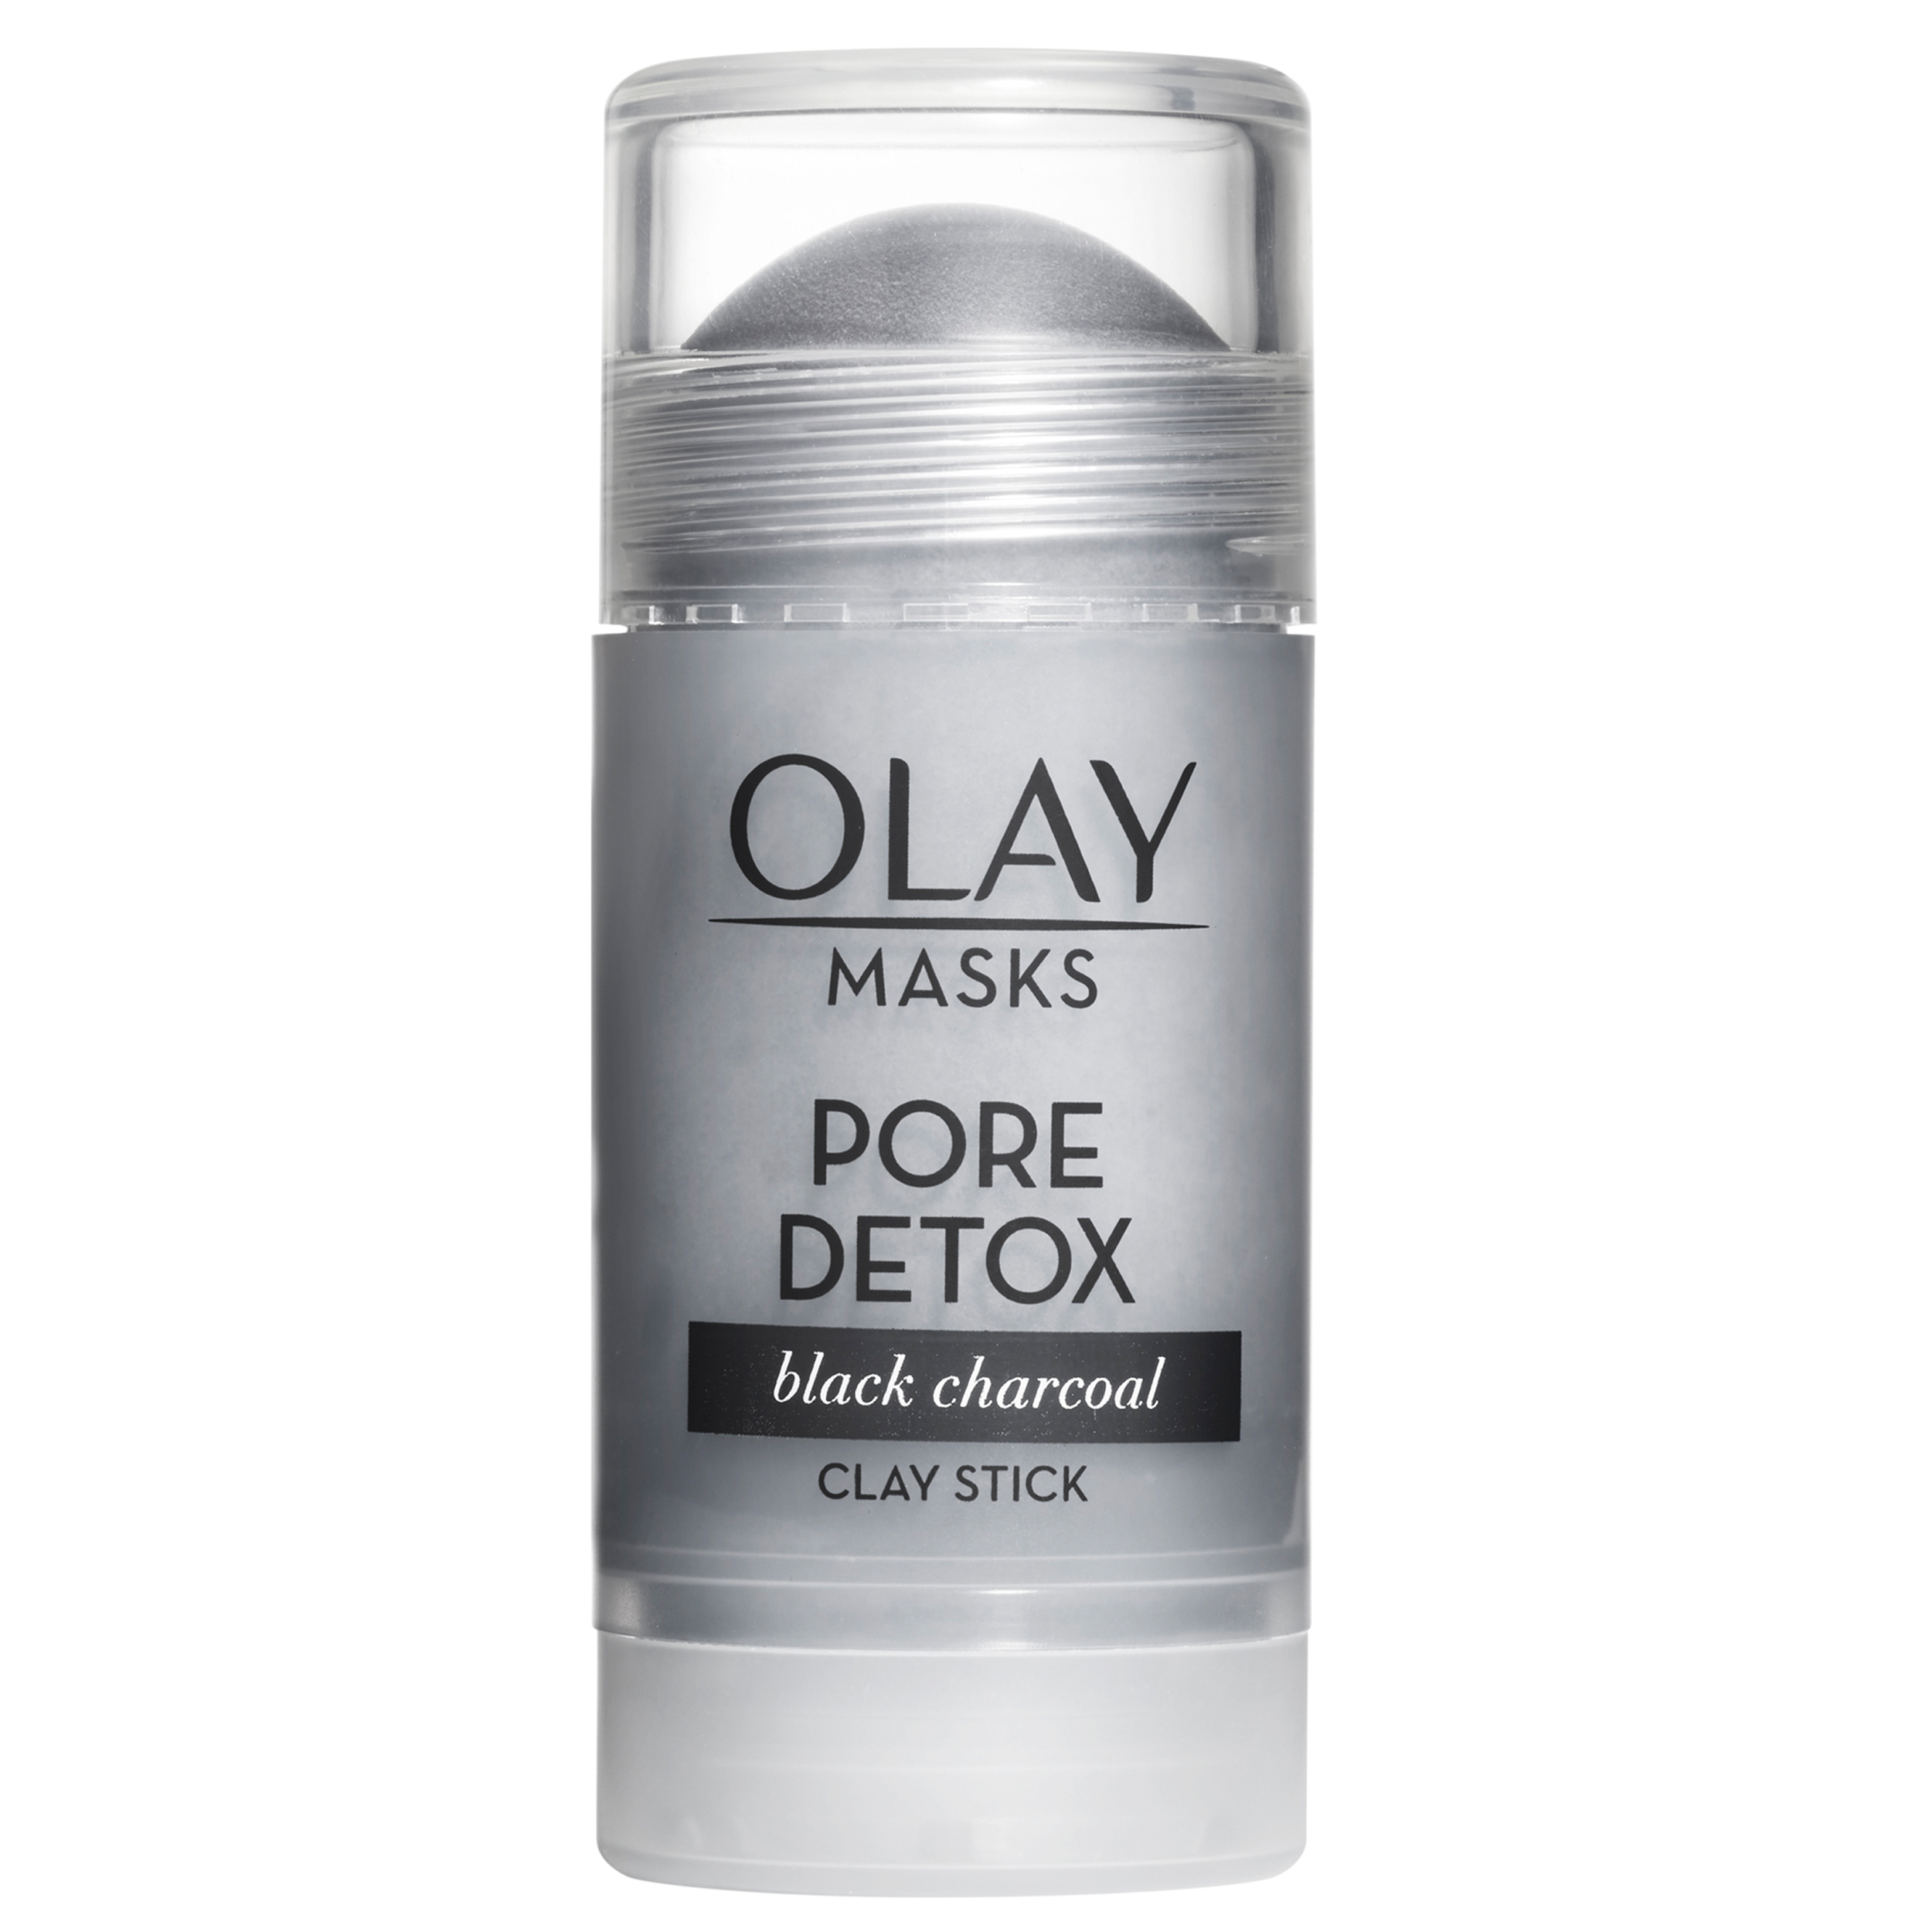 Olay Pore Detox Face Mask Clay Stick with Black Charcoal, 1.7 oz - image 1 of 10